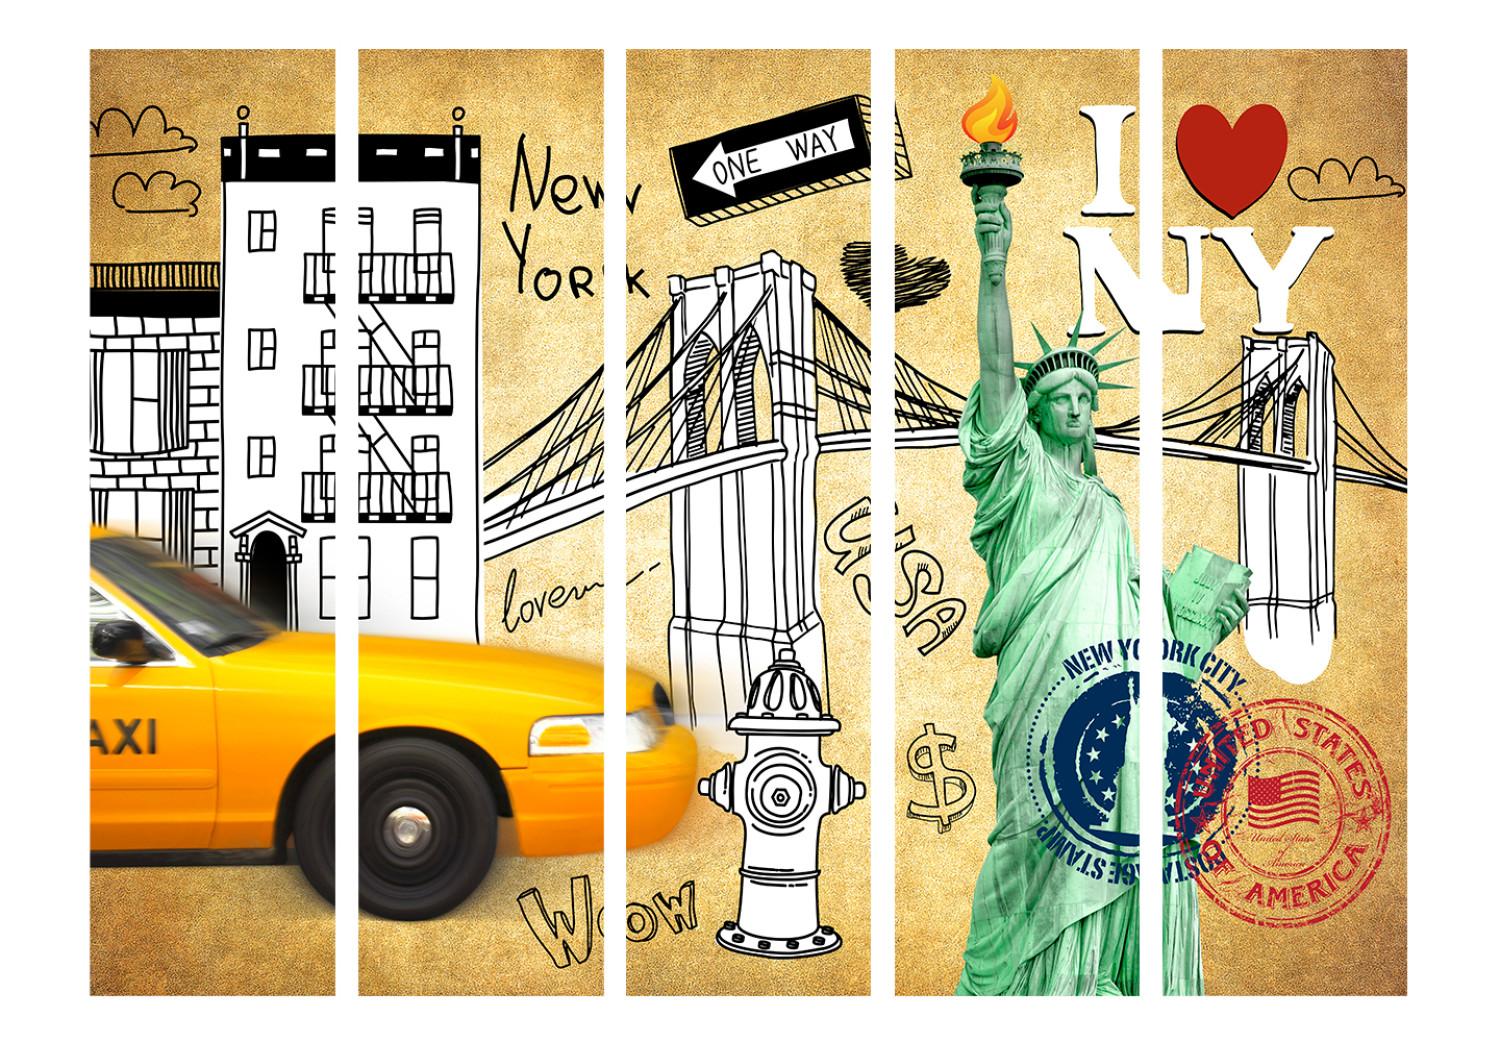 Room Divider One Way - New York II - yellow car and signs on a creative pattern